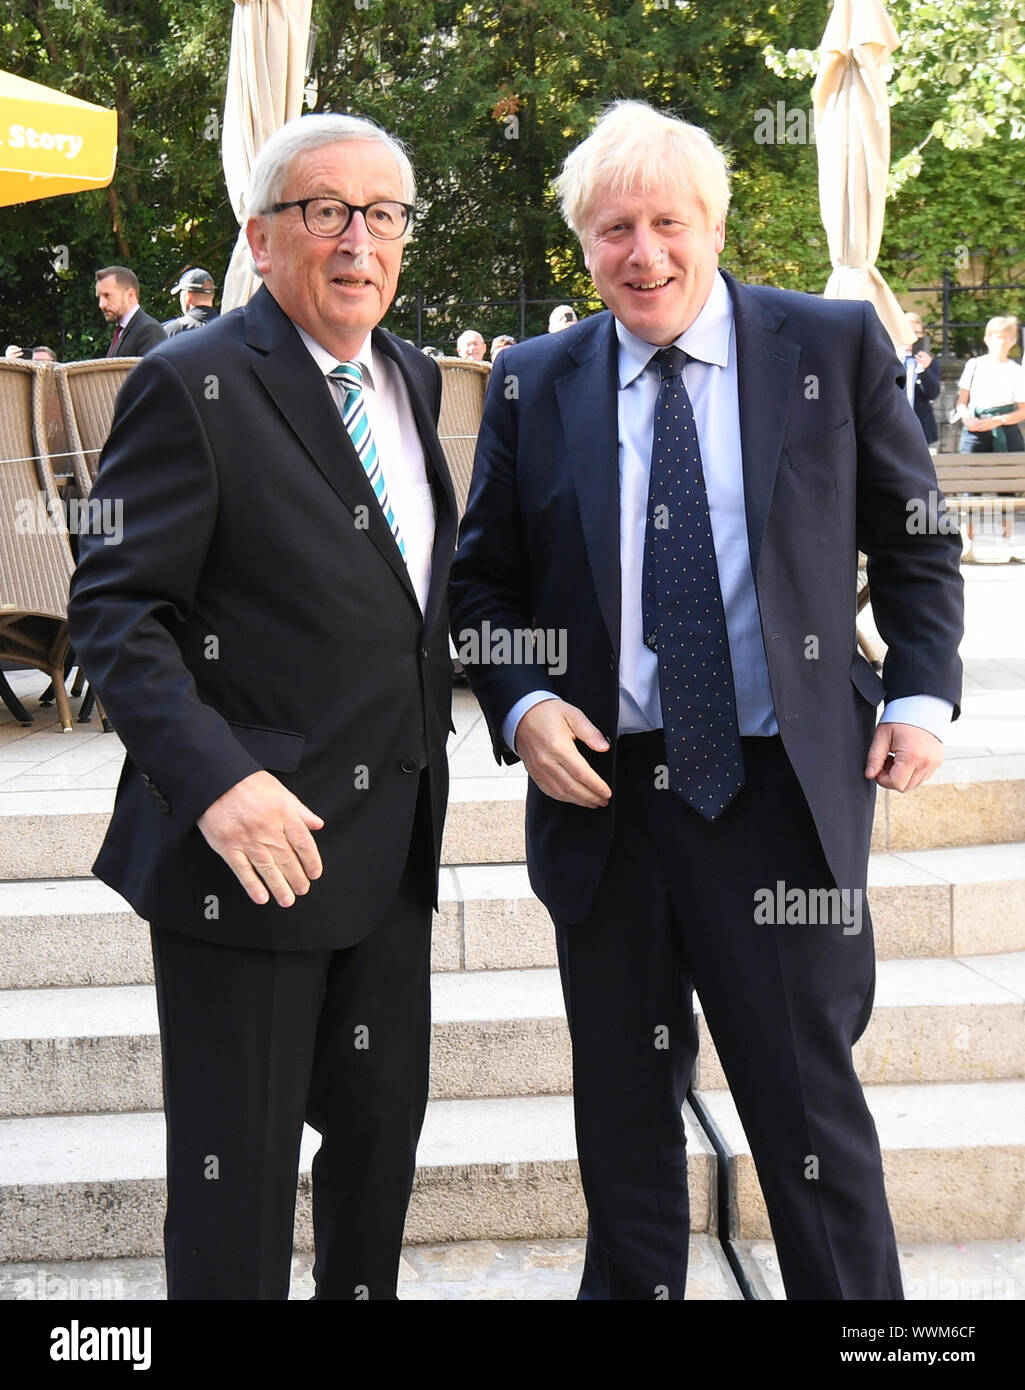 Prime Minister Boris Johnson is greeted by European Commission President  Jean-Claude Juncker, outside Le Bouquet Garni restaurant in Luxembourg,  prior to a working lunch on Brexit Stock Photo - Alamy